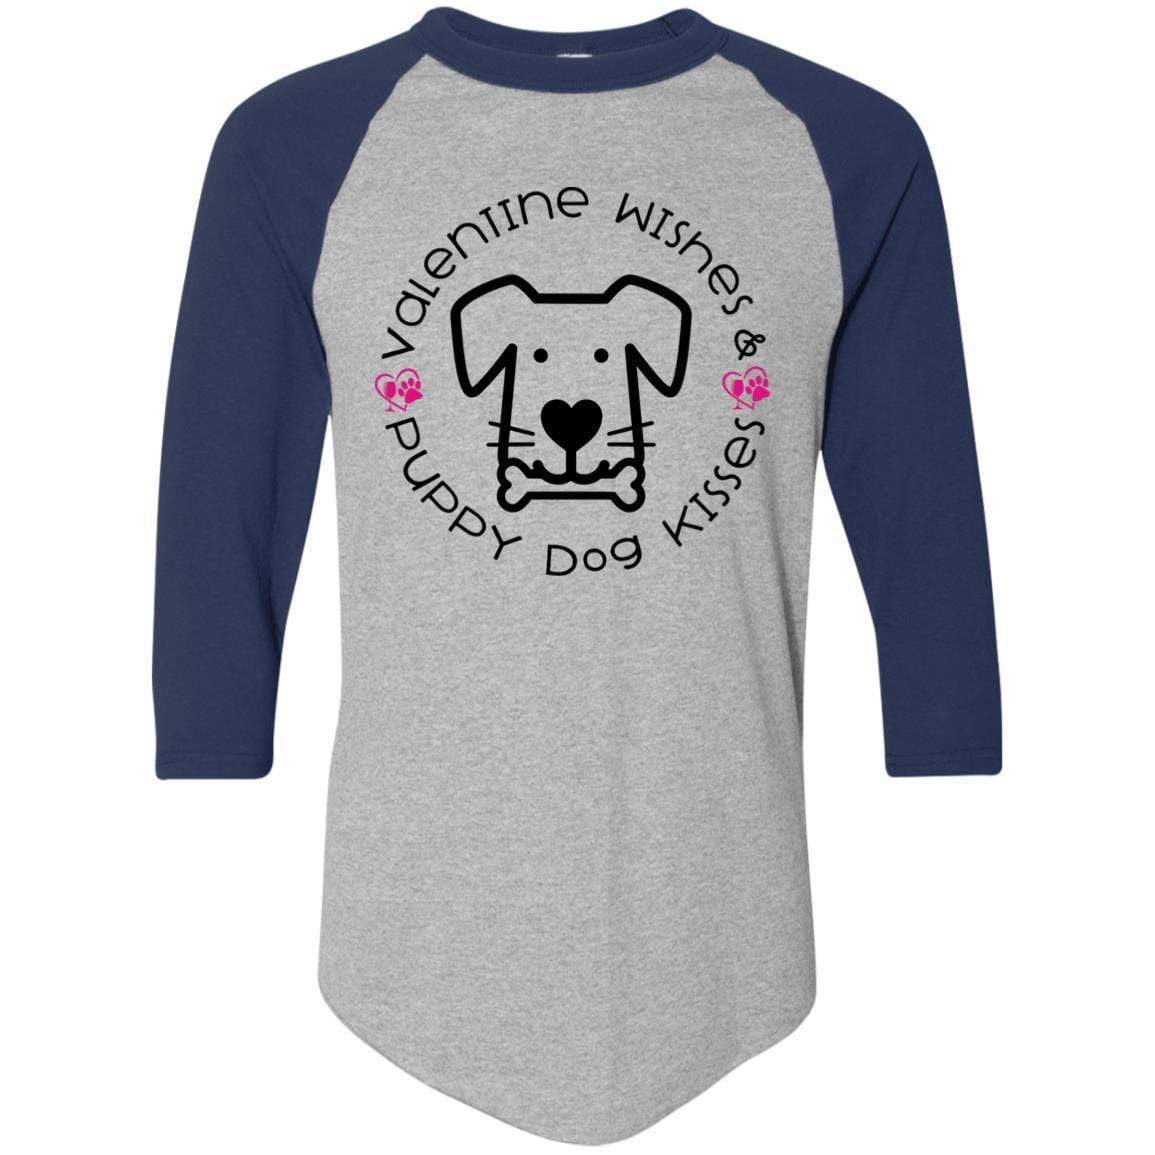 T-Shirts Athletic Heather/Navy / S Winey Bitches Co 'Valentine Wishes and Puppy Dog Kisses" (Dog) Colorblock Raglan Jersey WineyBitchesCo